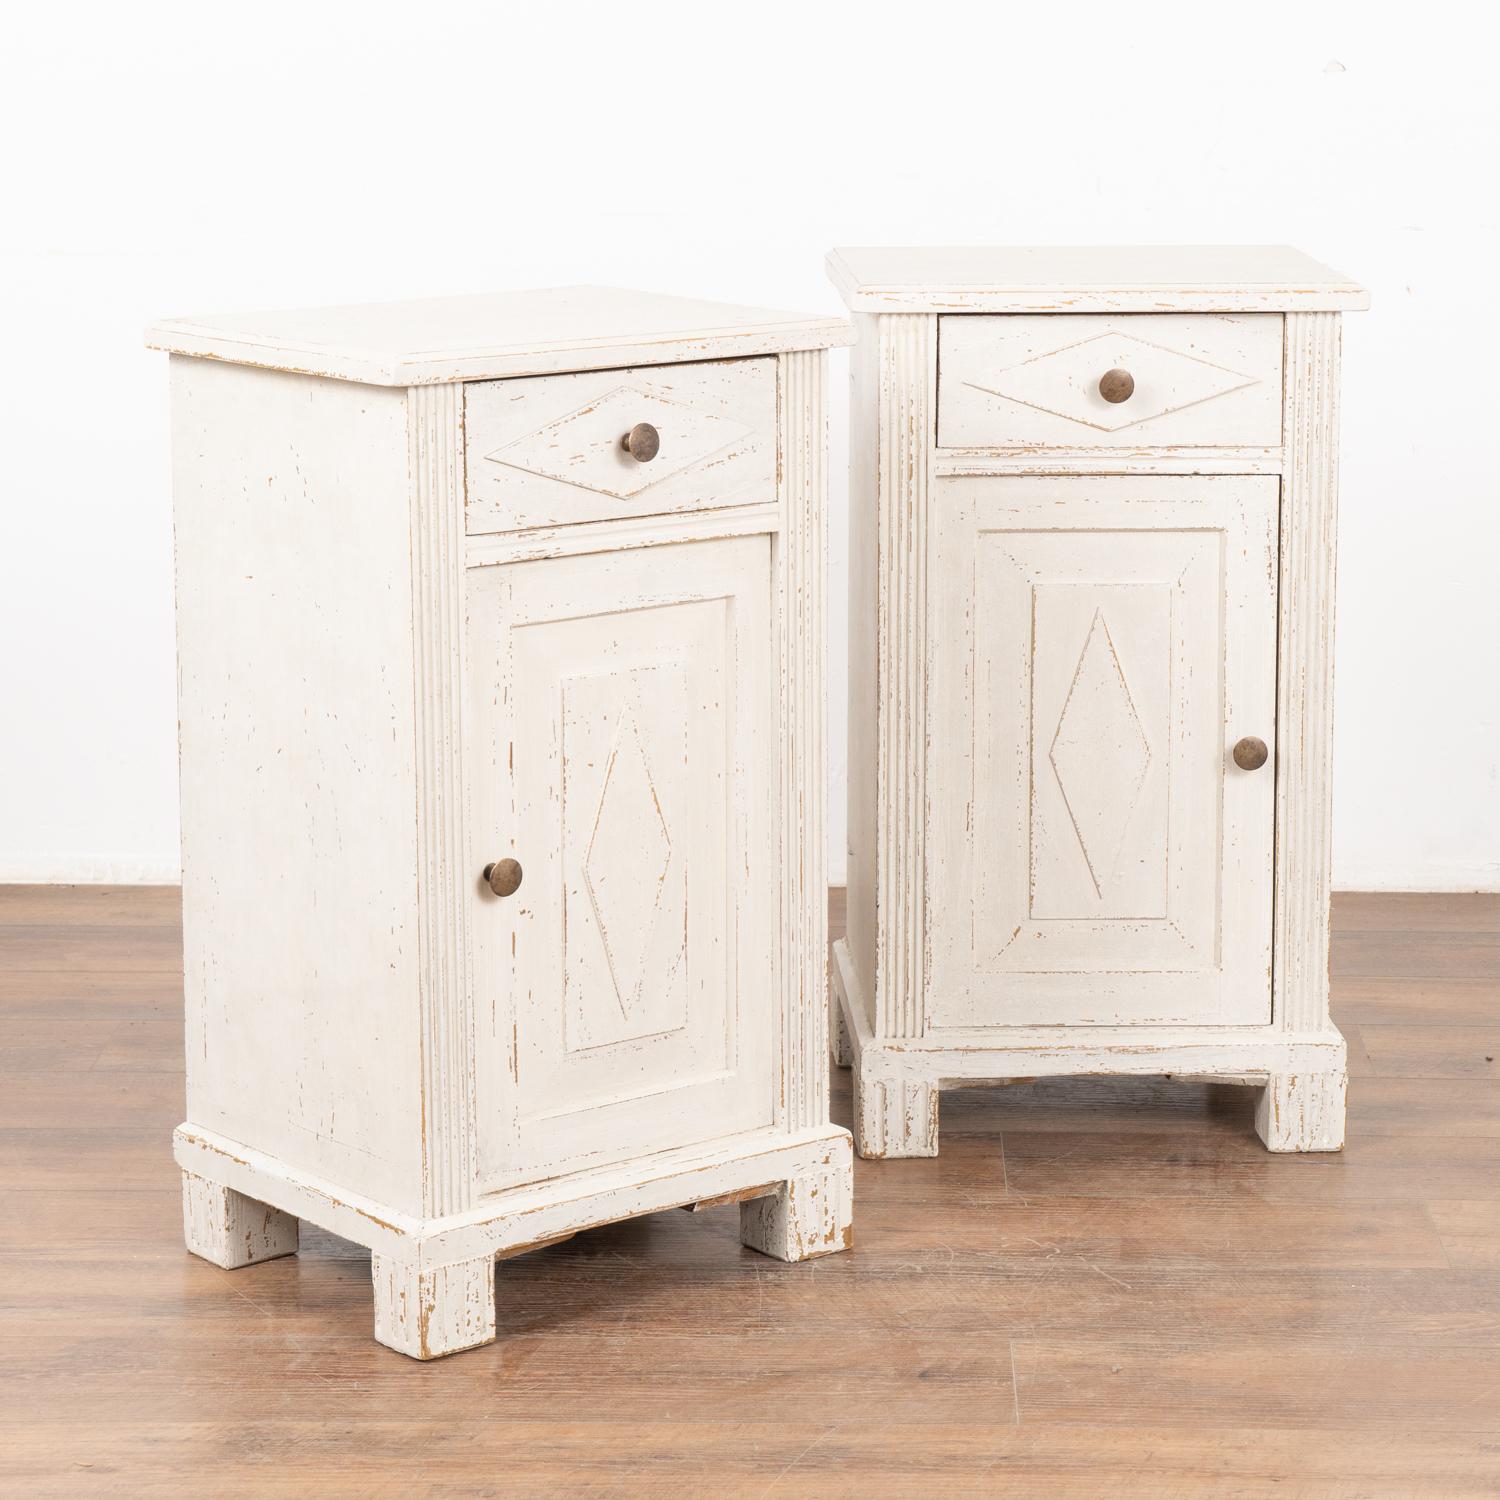 Pair, small Swedish country Gustavian style white painted nightstands or small cabinets standing on block feet.
Traditional diamond motif on doors and drawers, simple fluted carving along sides.
Newer professionally applied antique white painted